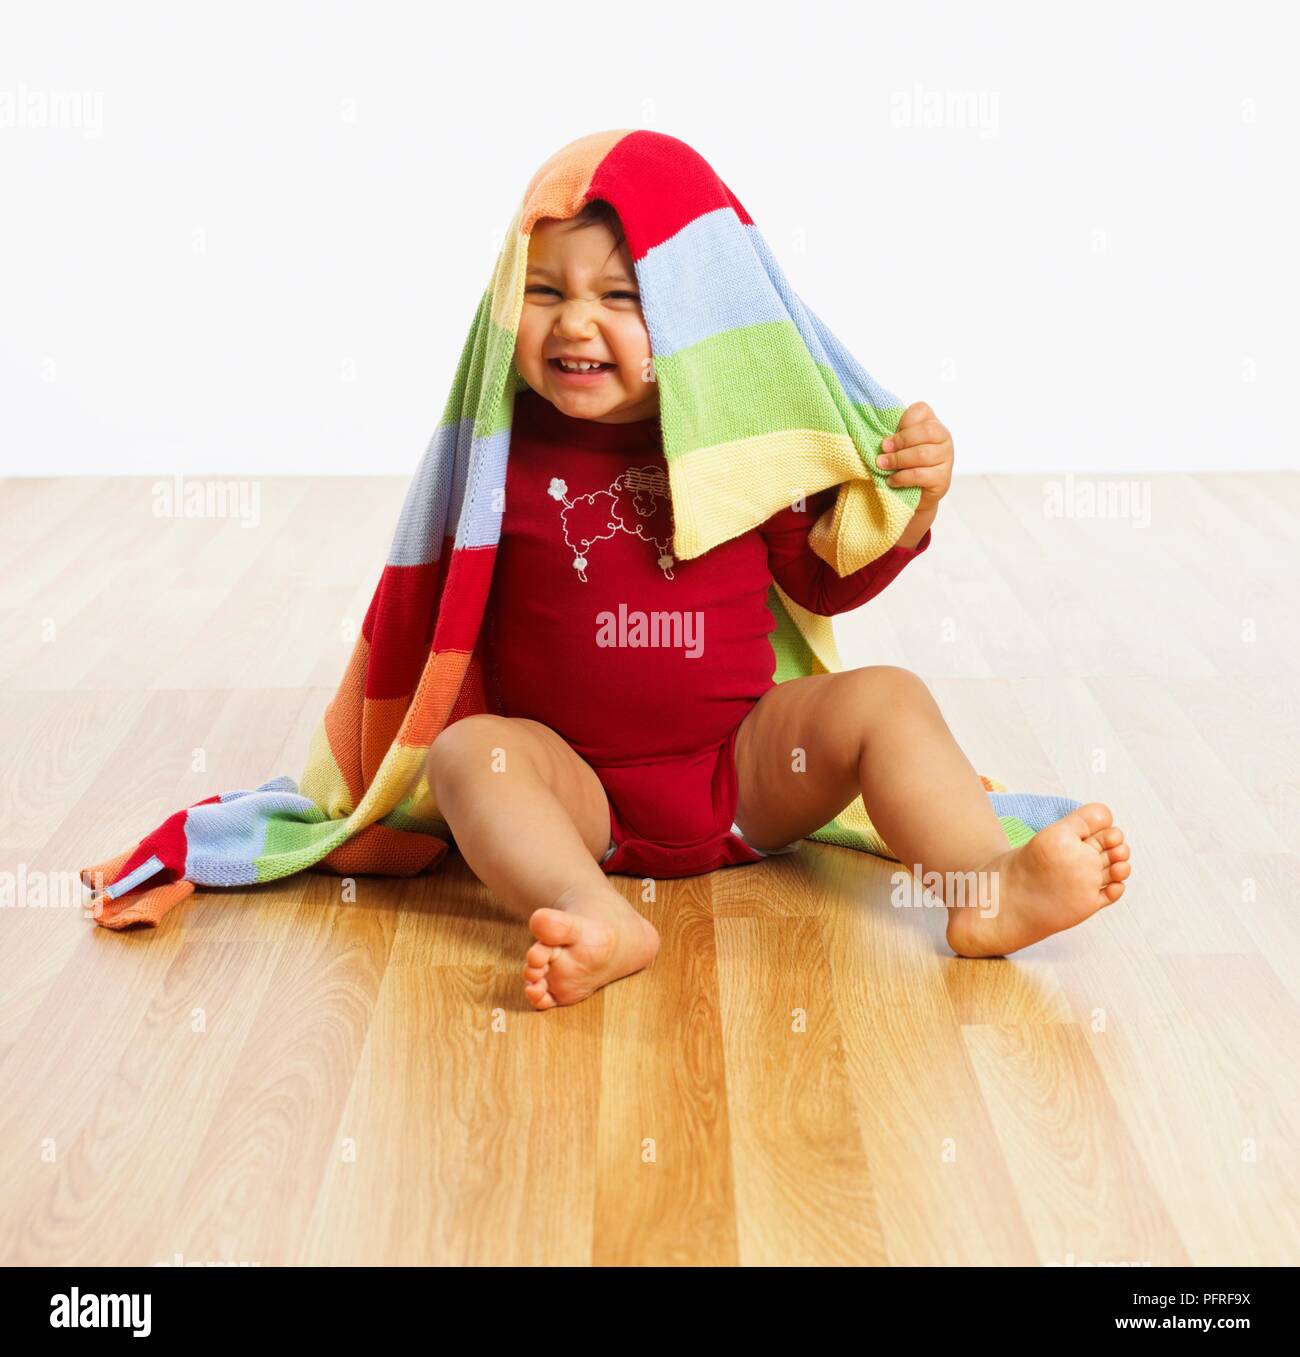 Baby girl sitting with a stripy blanket over her head, smiling Stock Photo